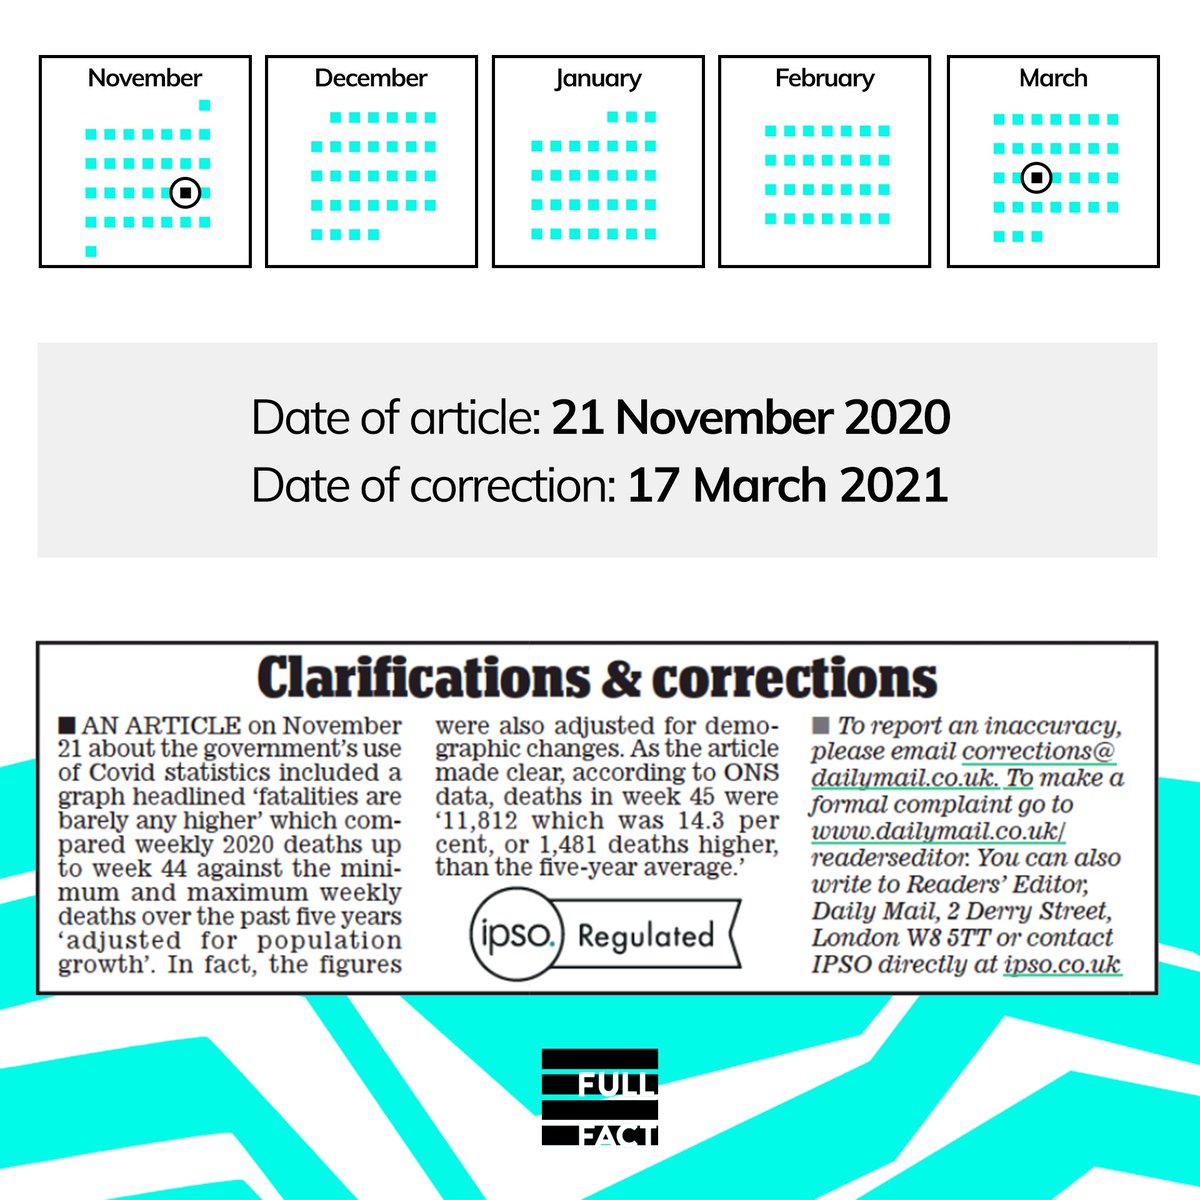 We're pleased that the Daily Mail have issued a correction in the print edition of today's paper. But it's not right that this has taken almost four months. We will continue to work hard to fight for timely and appropriate corrections and to hold the media to account.